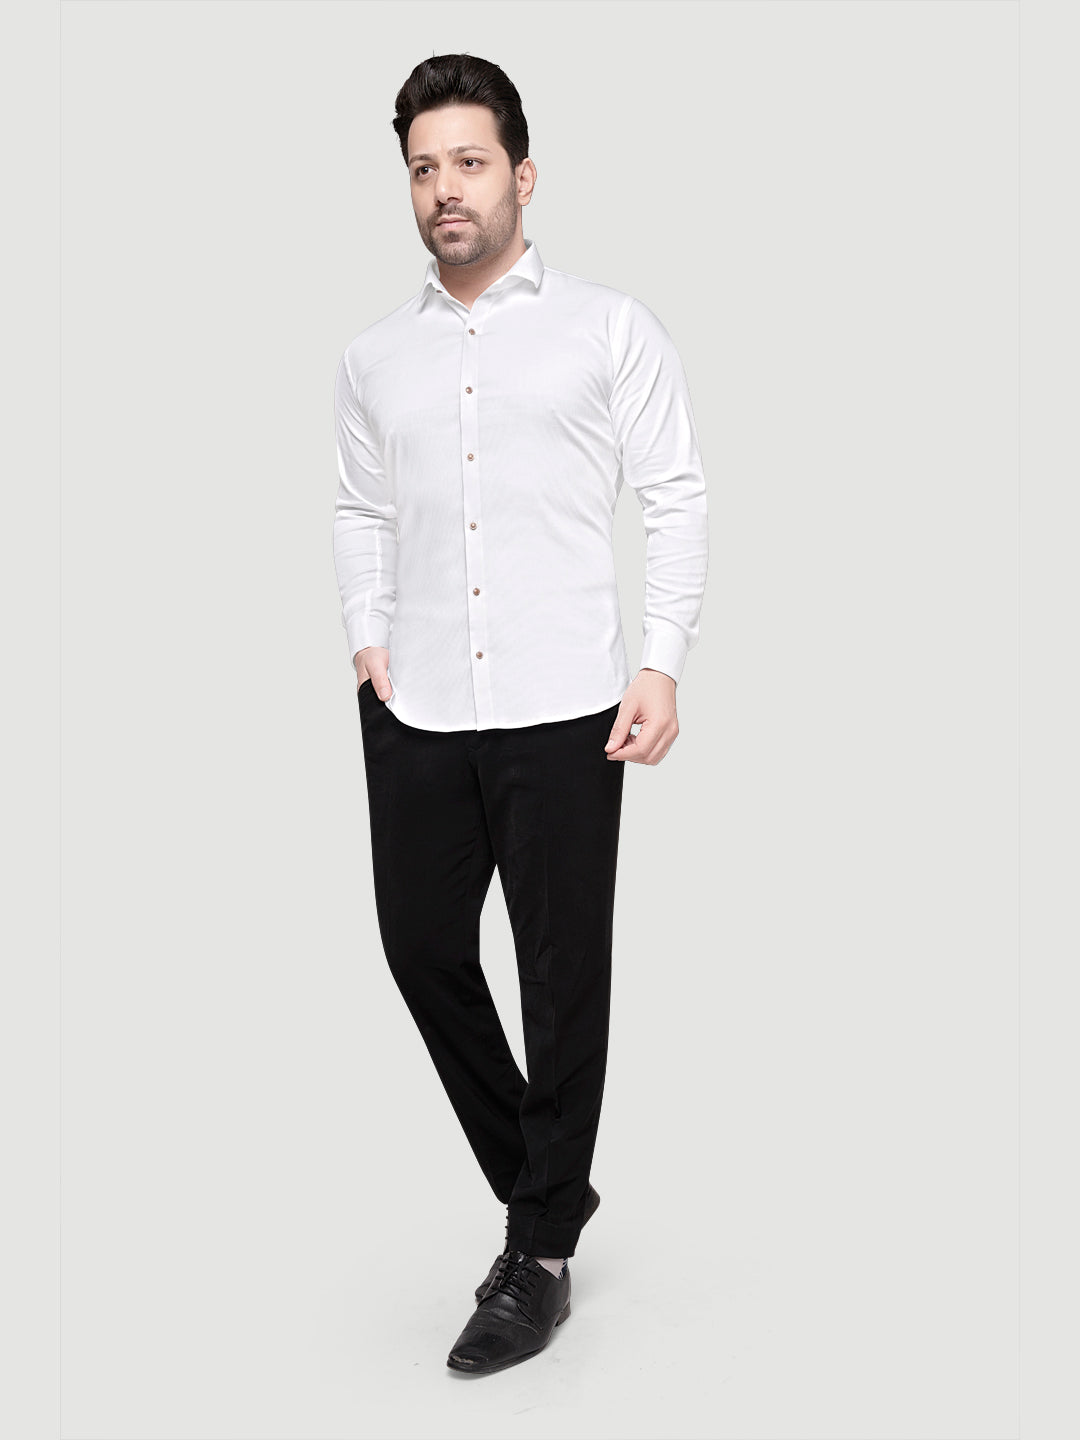 Black and White Men's Designer Shirt with Collar Accessory & Broach White